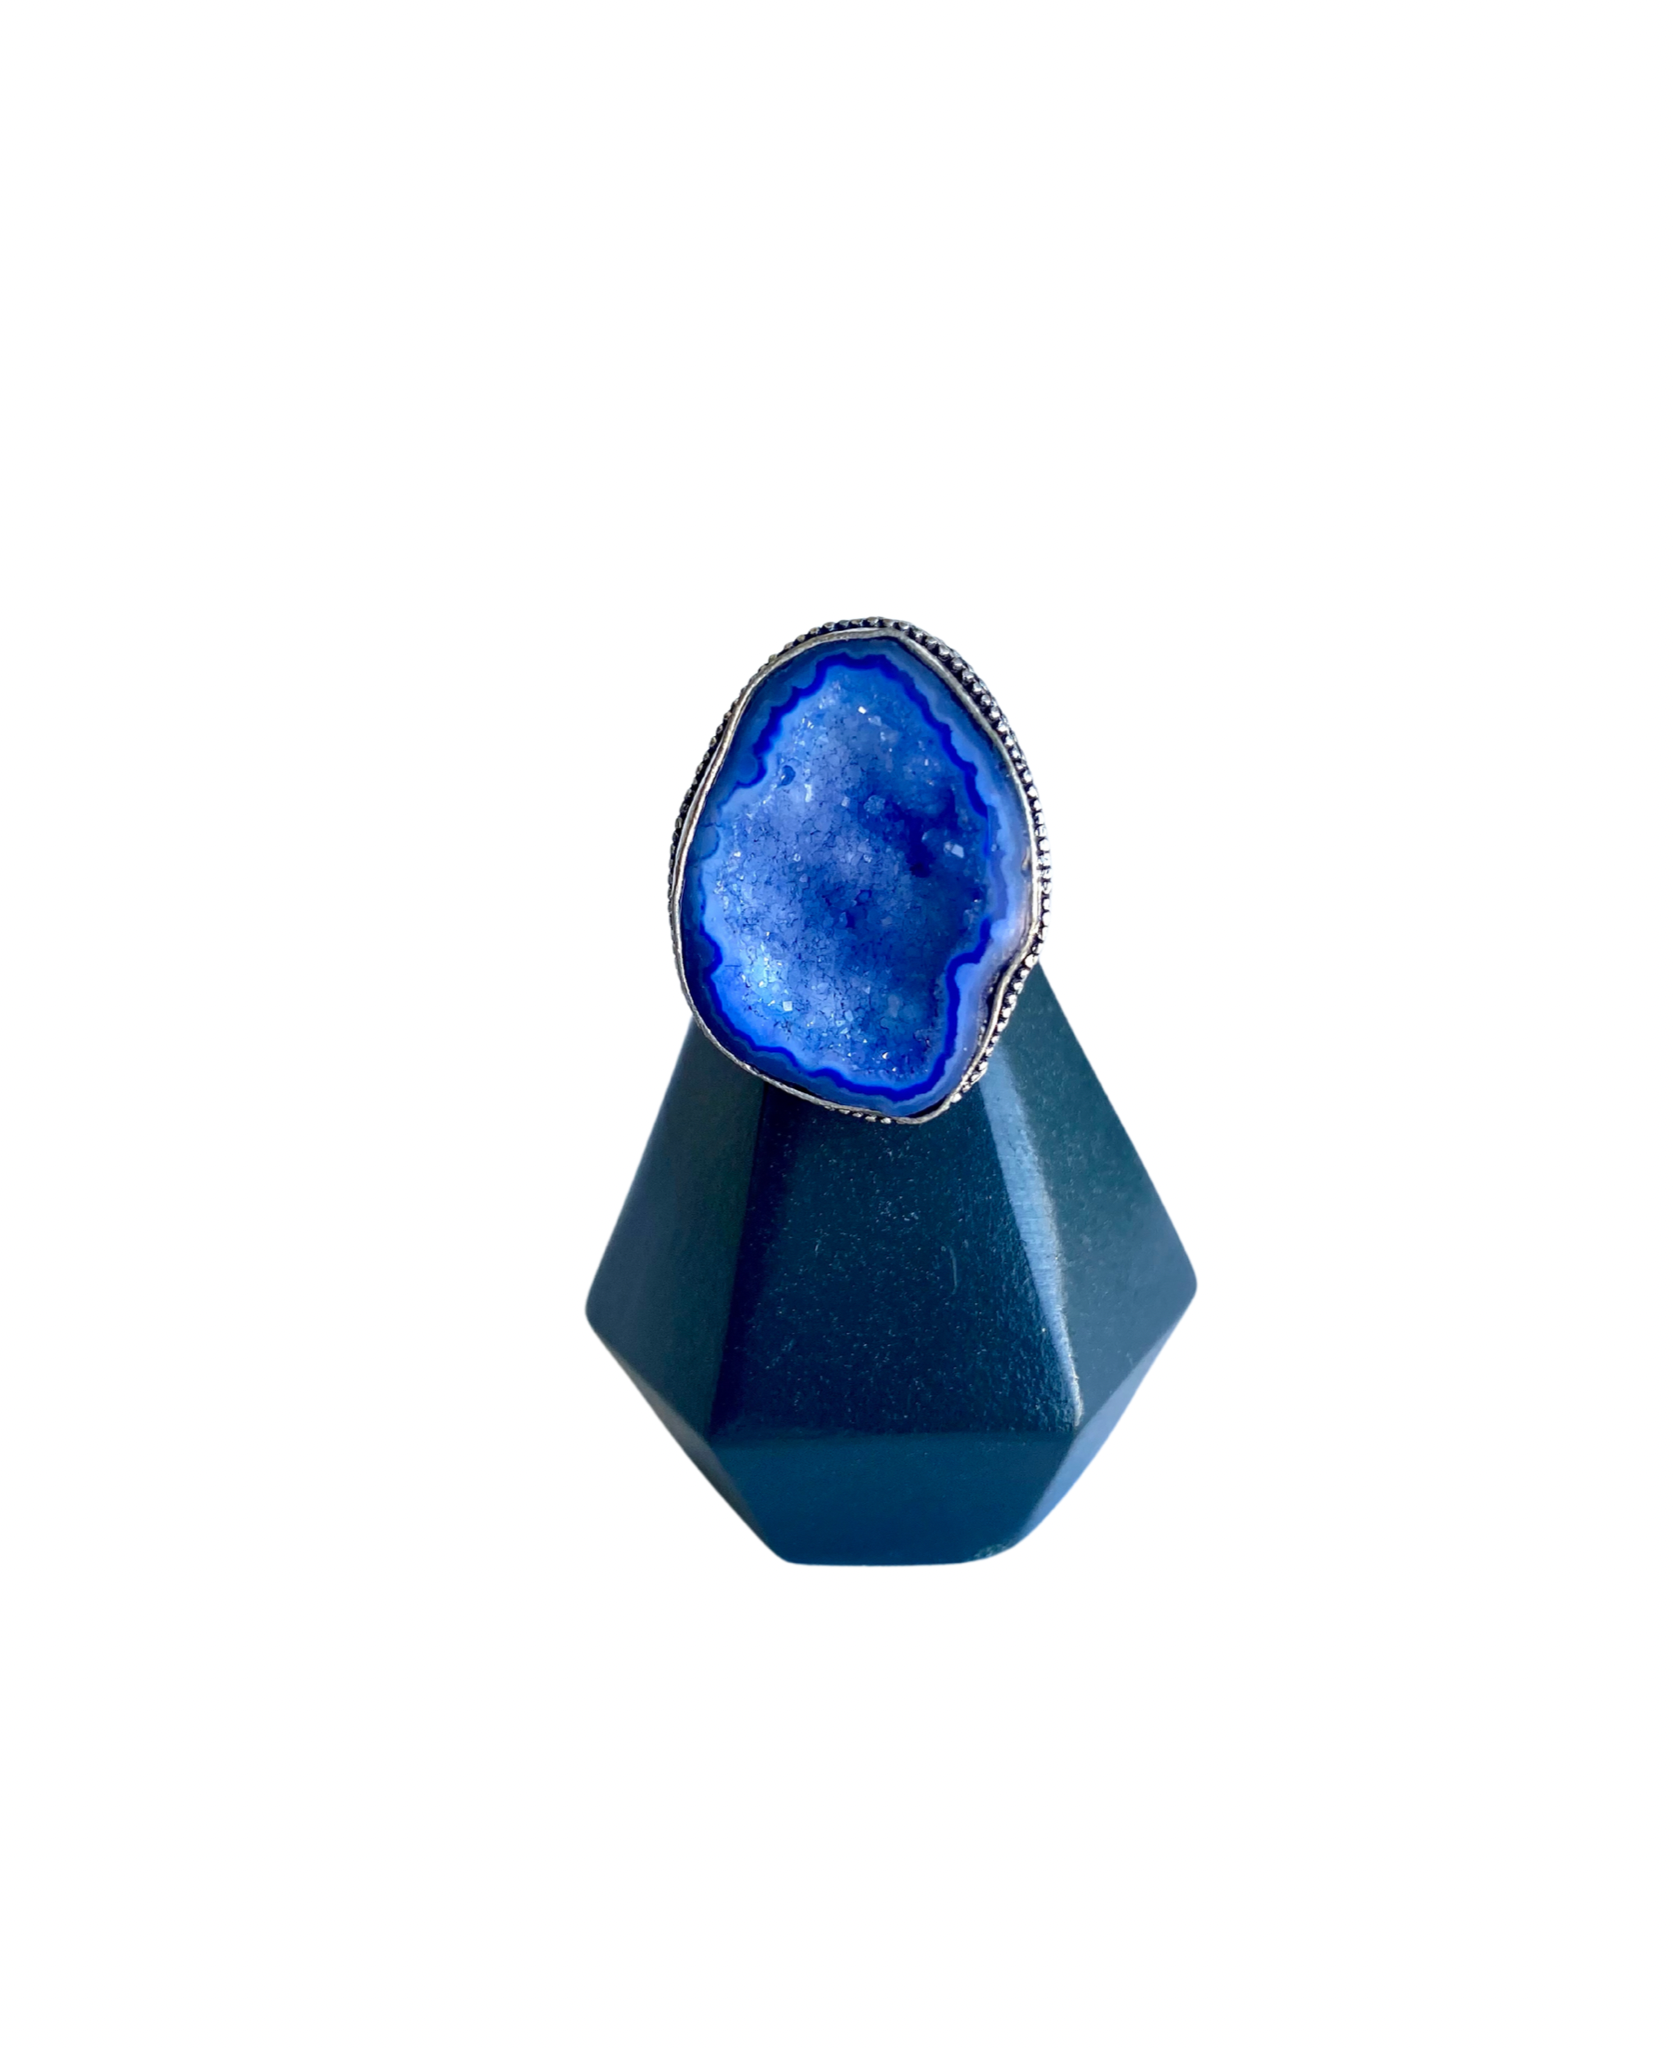 Blue Agate Geode Druzy Gemstone 925 Silver Plated Antique Ring - Size 8